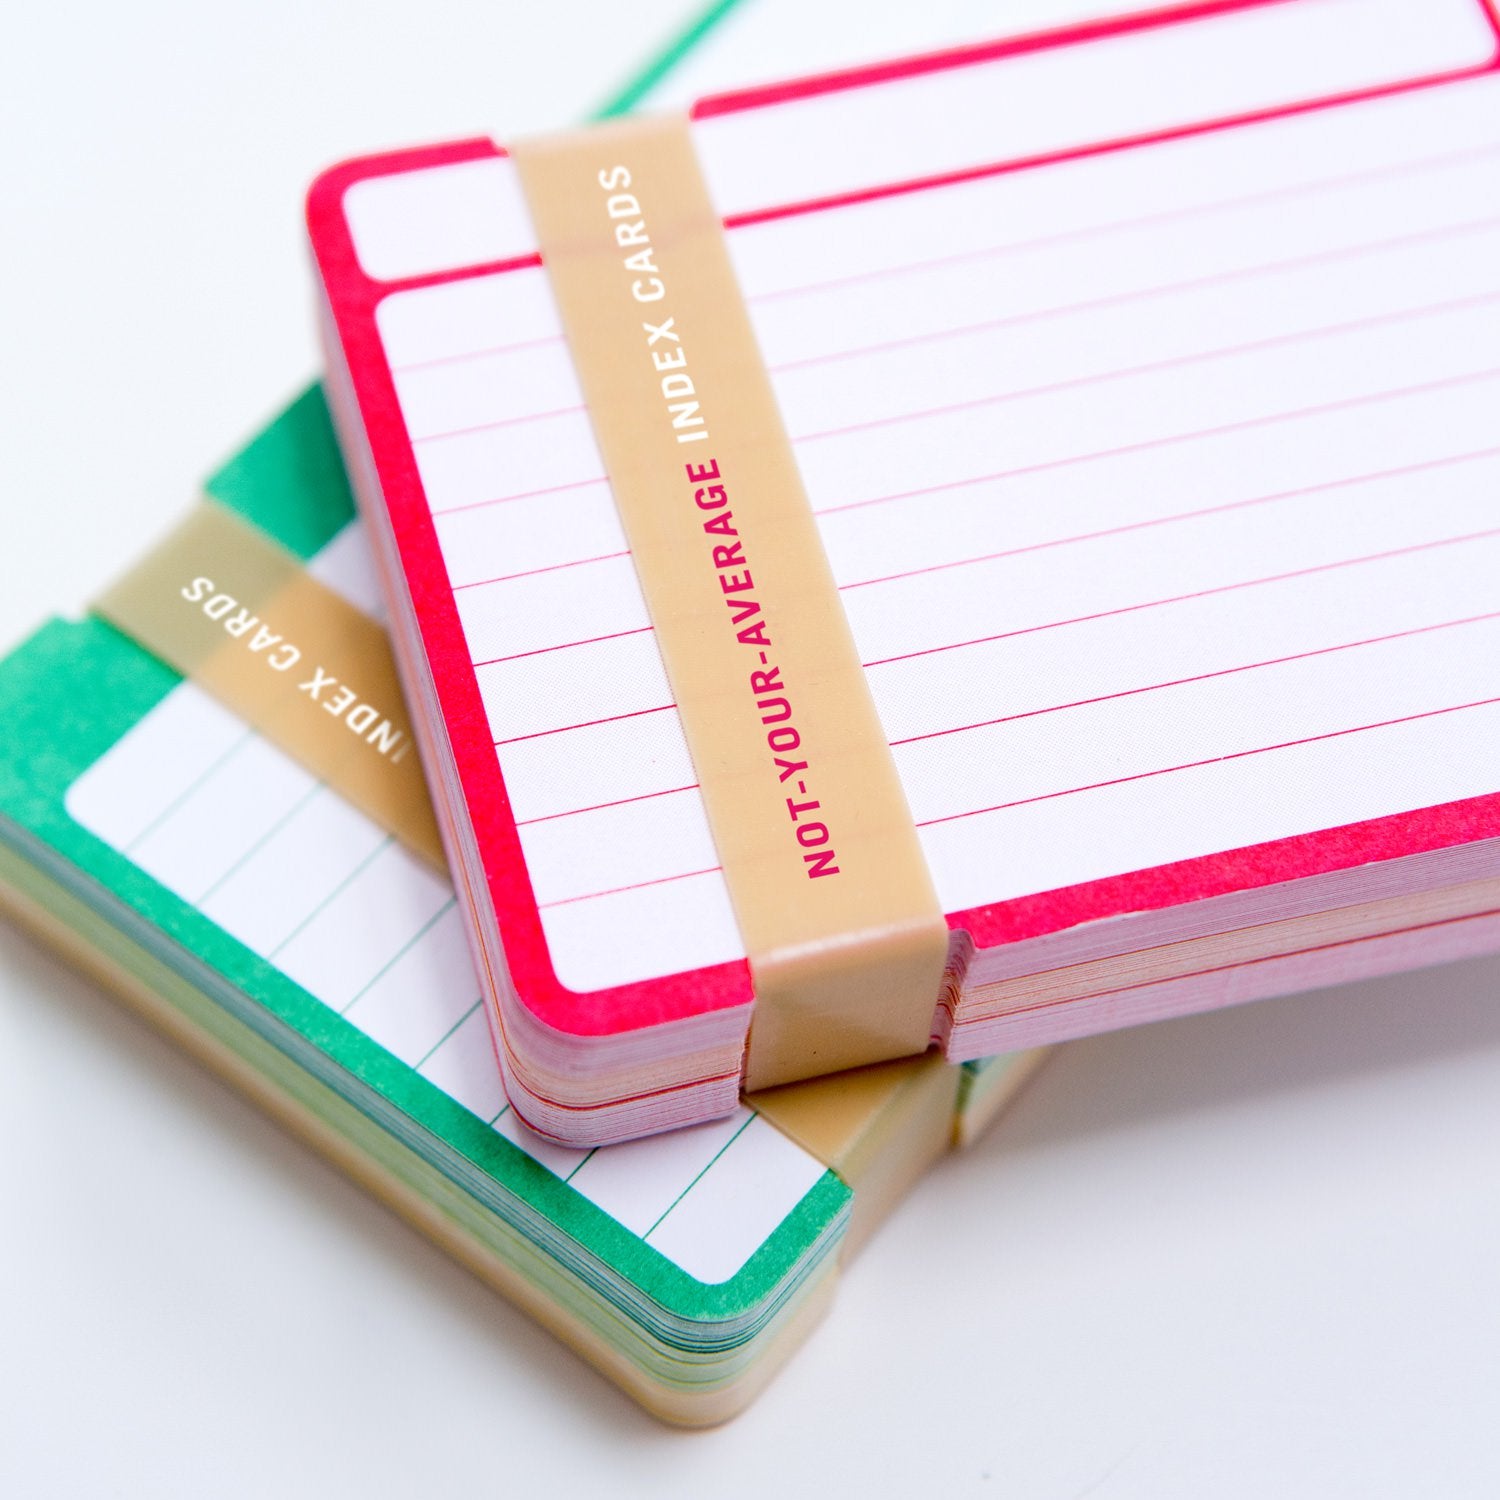 Knock Knock Tabbed Index Cards